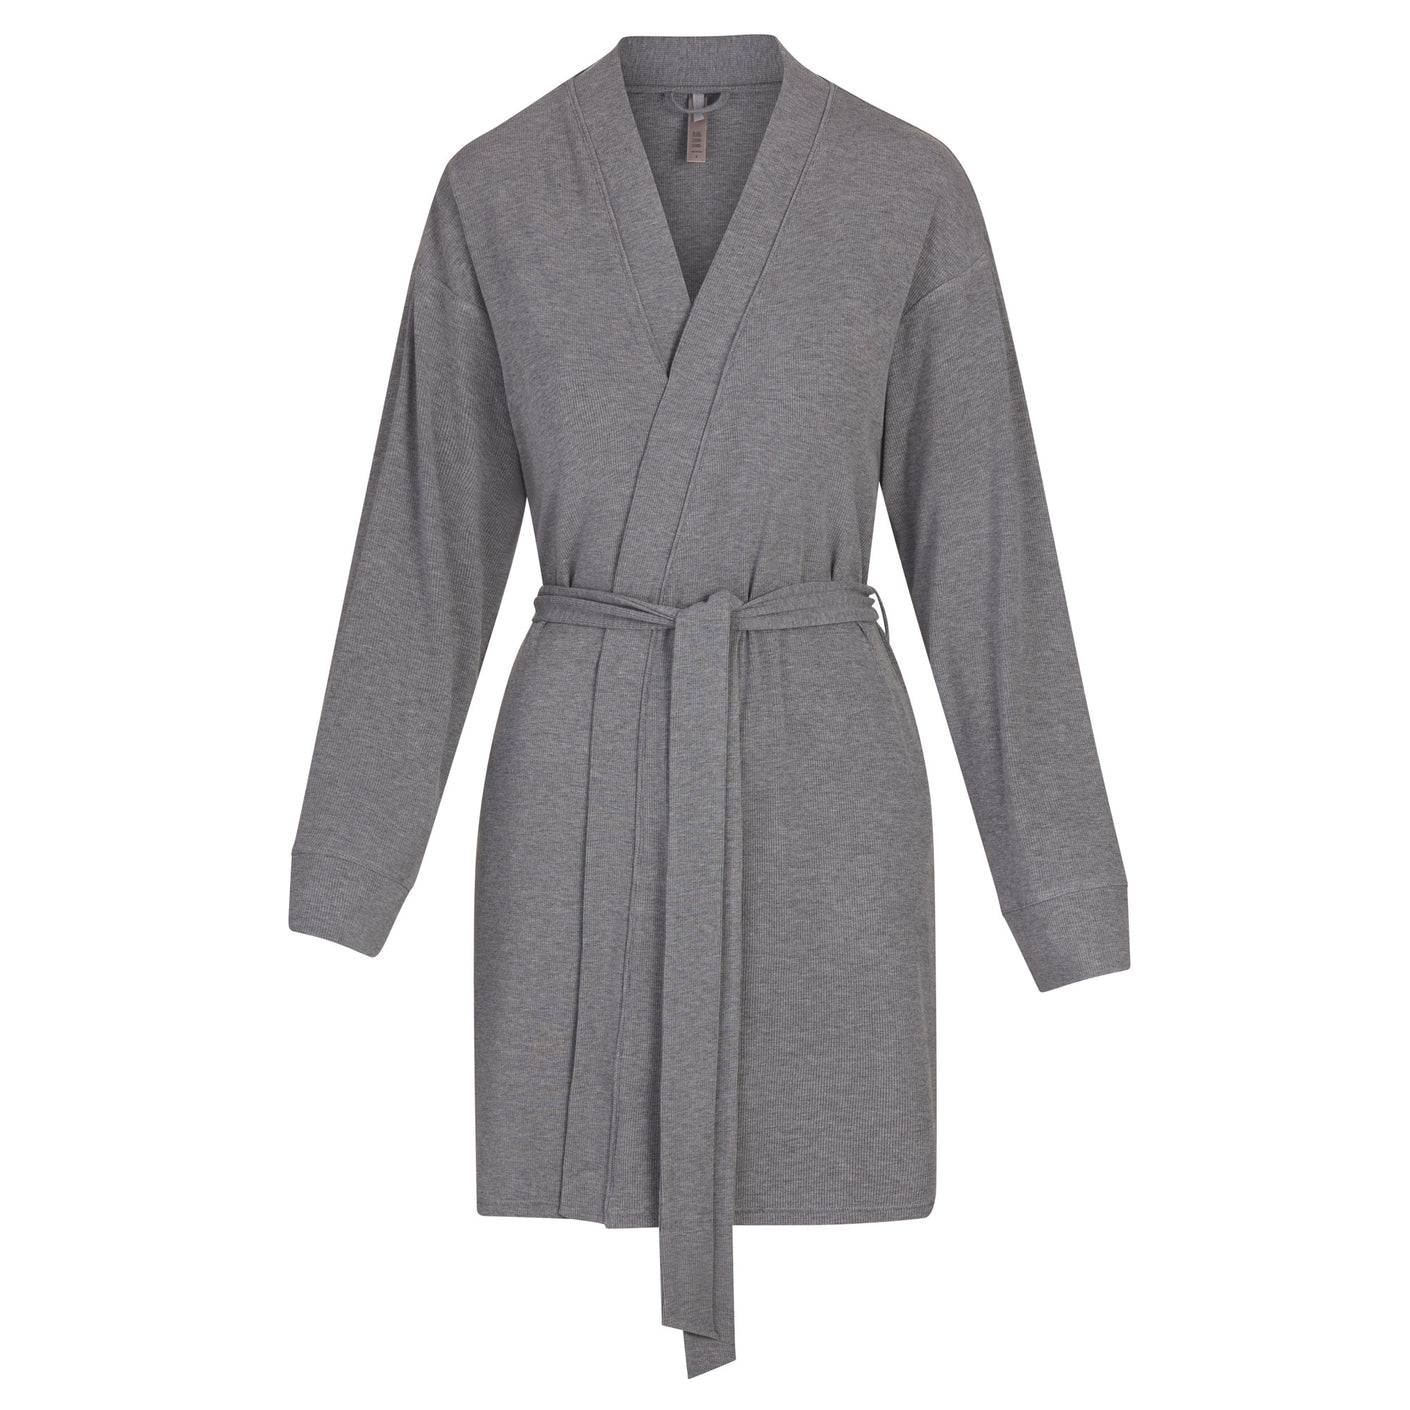 The Best SKIMS Robes To Add To Your Sleepwear Collection